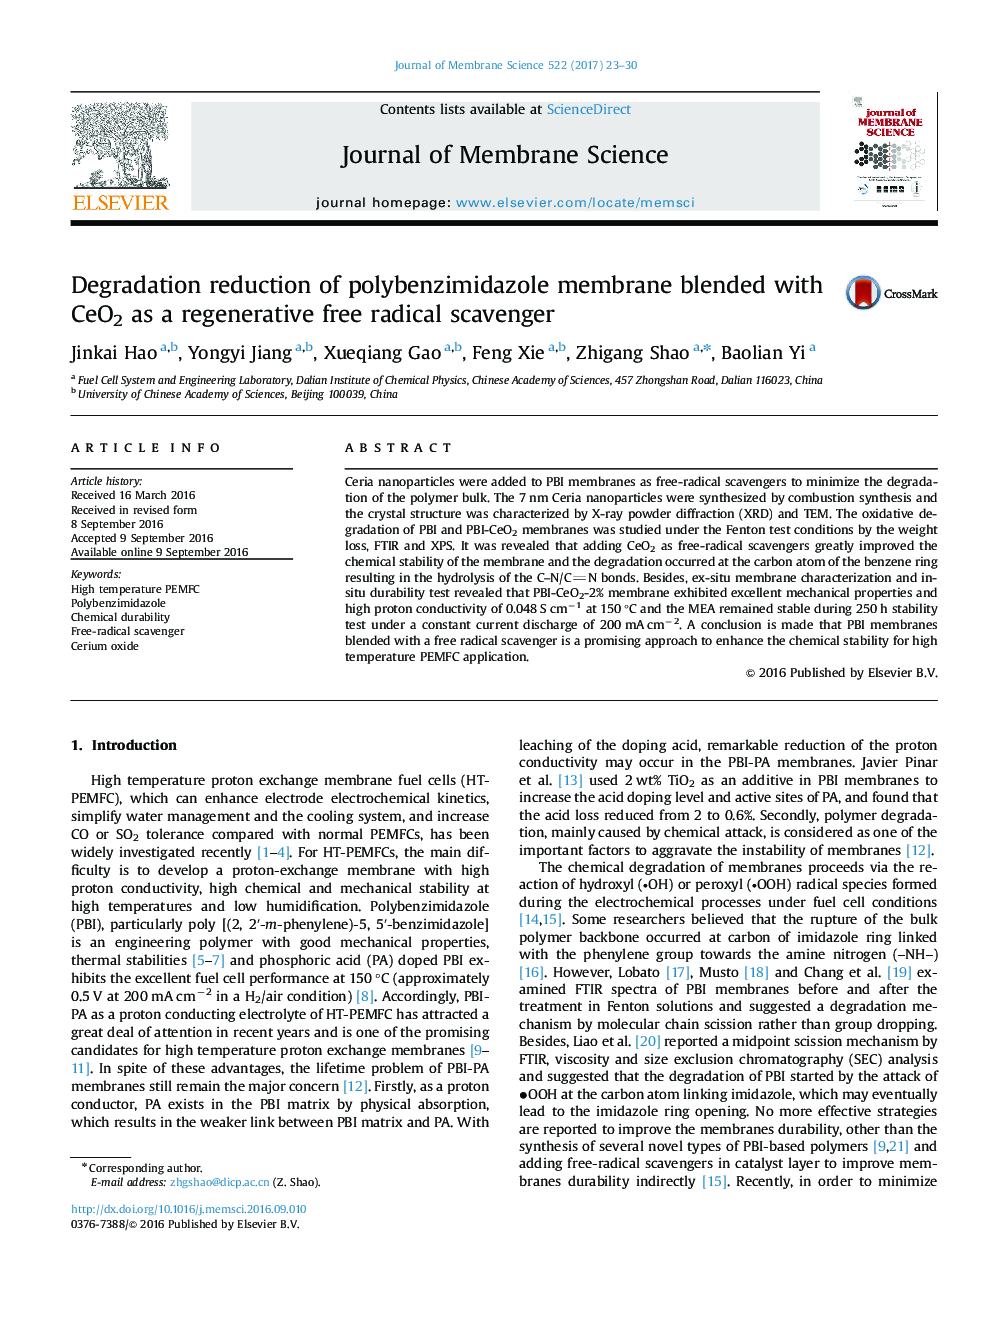 Degradation reduction of polybenzimidazole membrane blended with CeO2 as a regenerative free radical scavenger